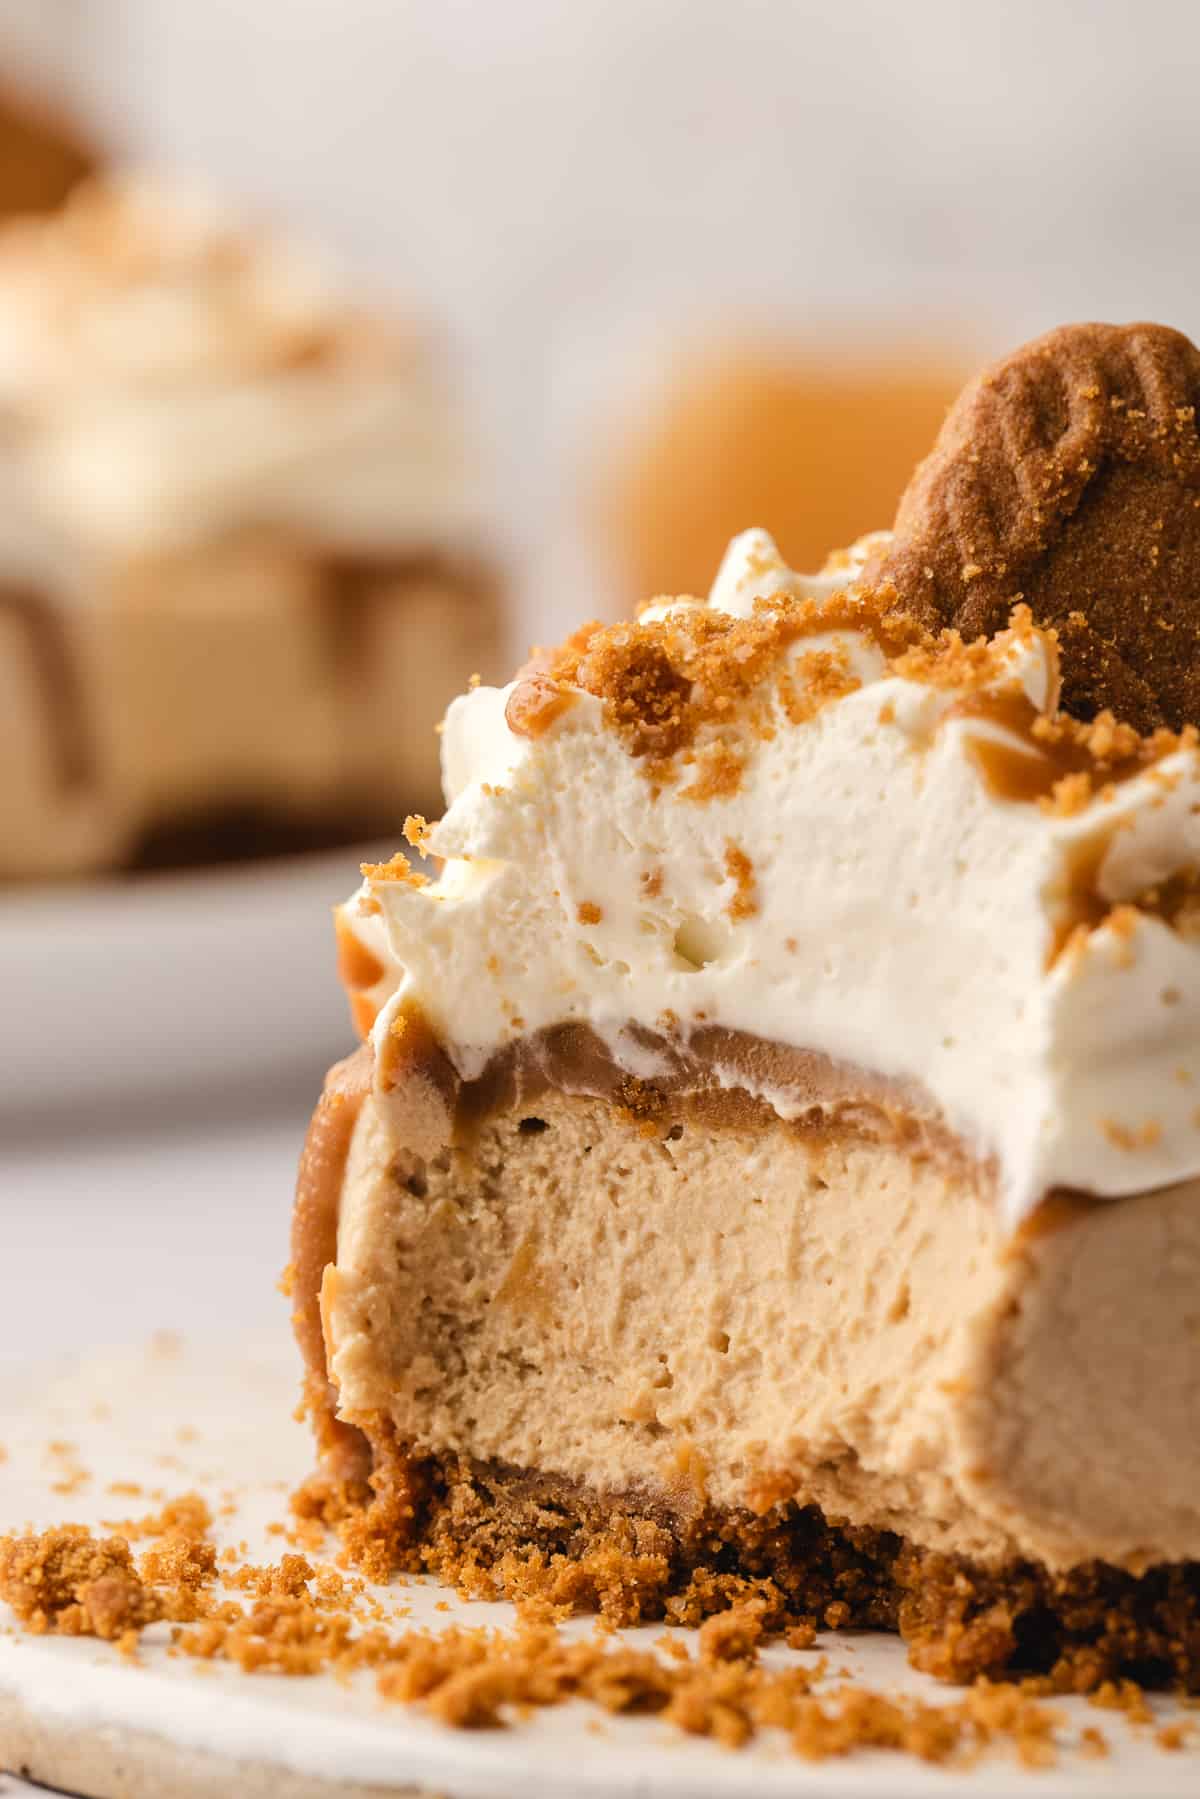 Close up of a mini Biscoff cheesecake with a bite taken out of it to show the inside.